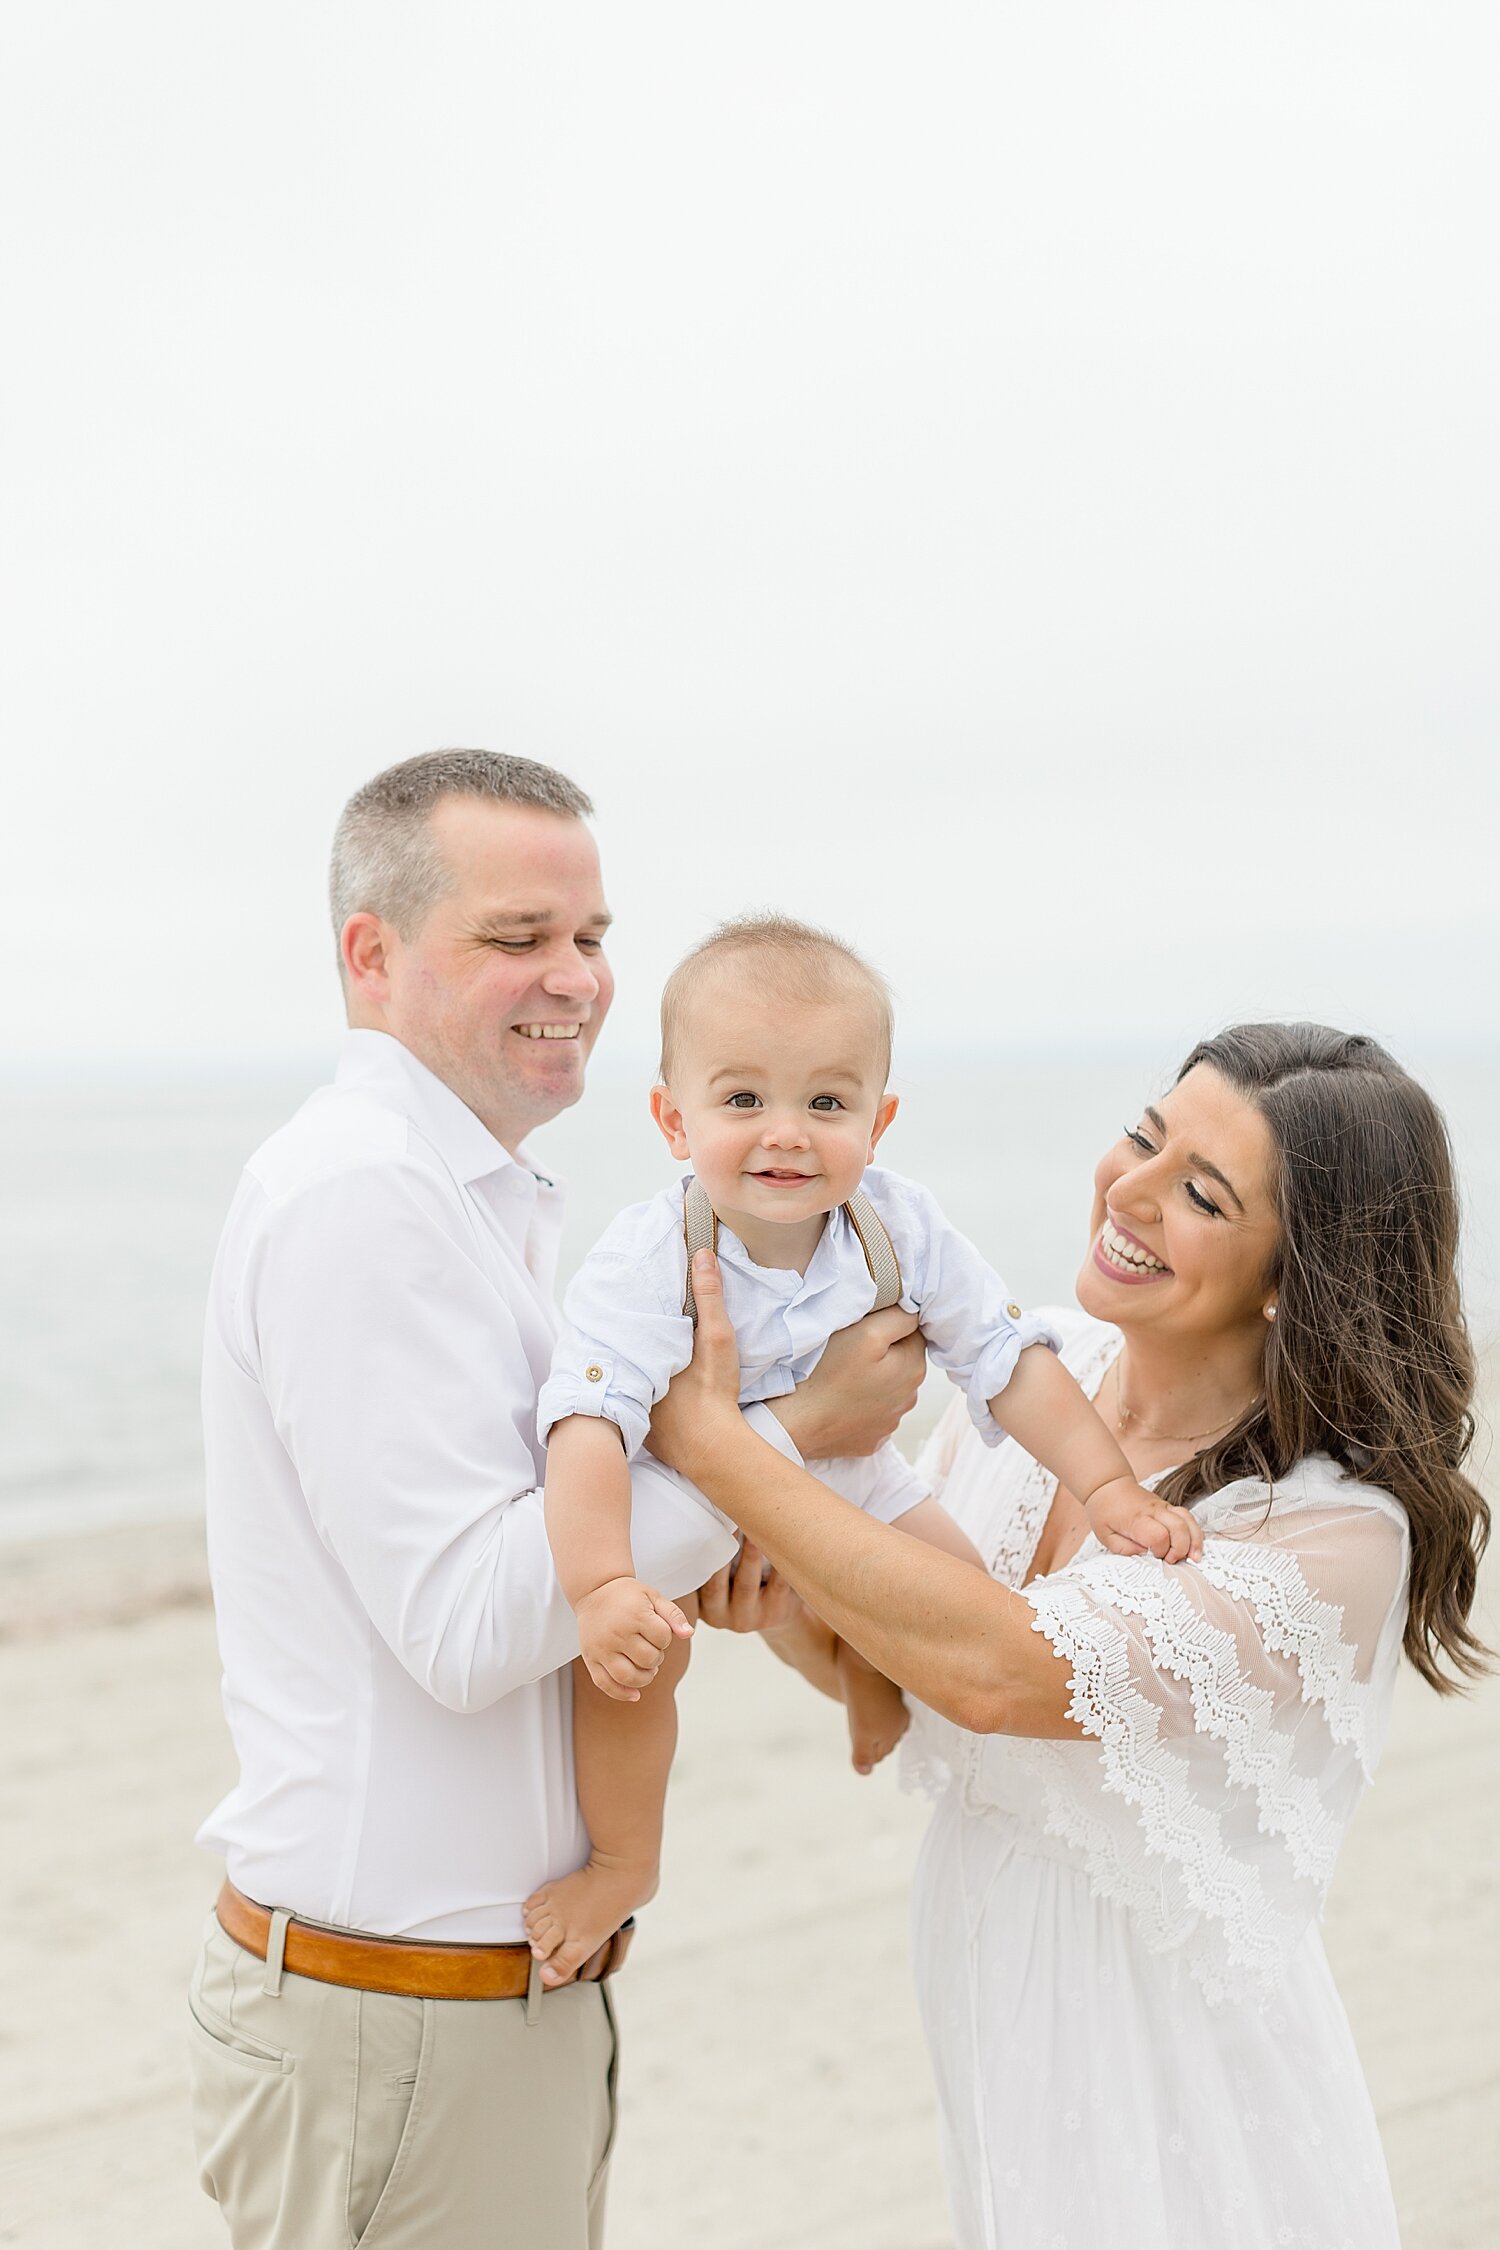 Mom and dad playing airplane with son on the beach for one year old photoshoot | Kristin Wood Photography